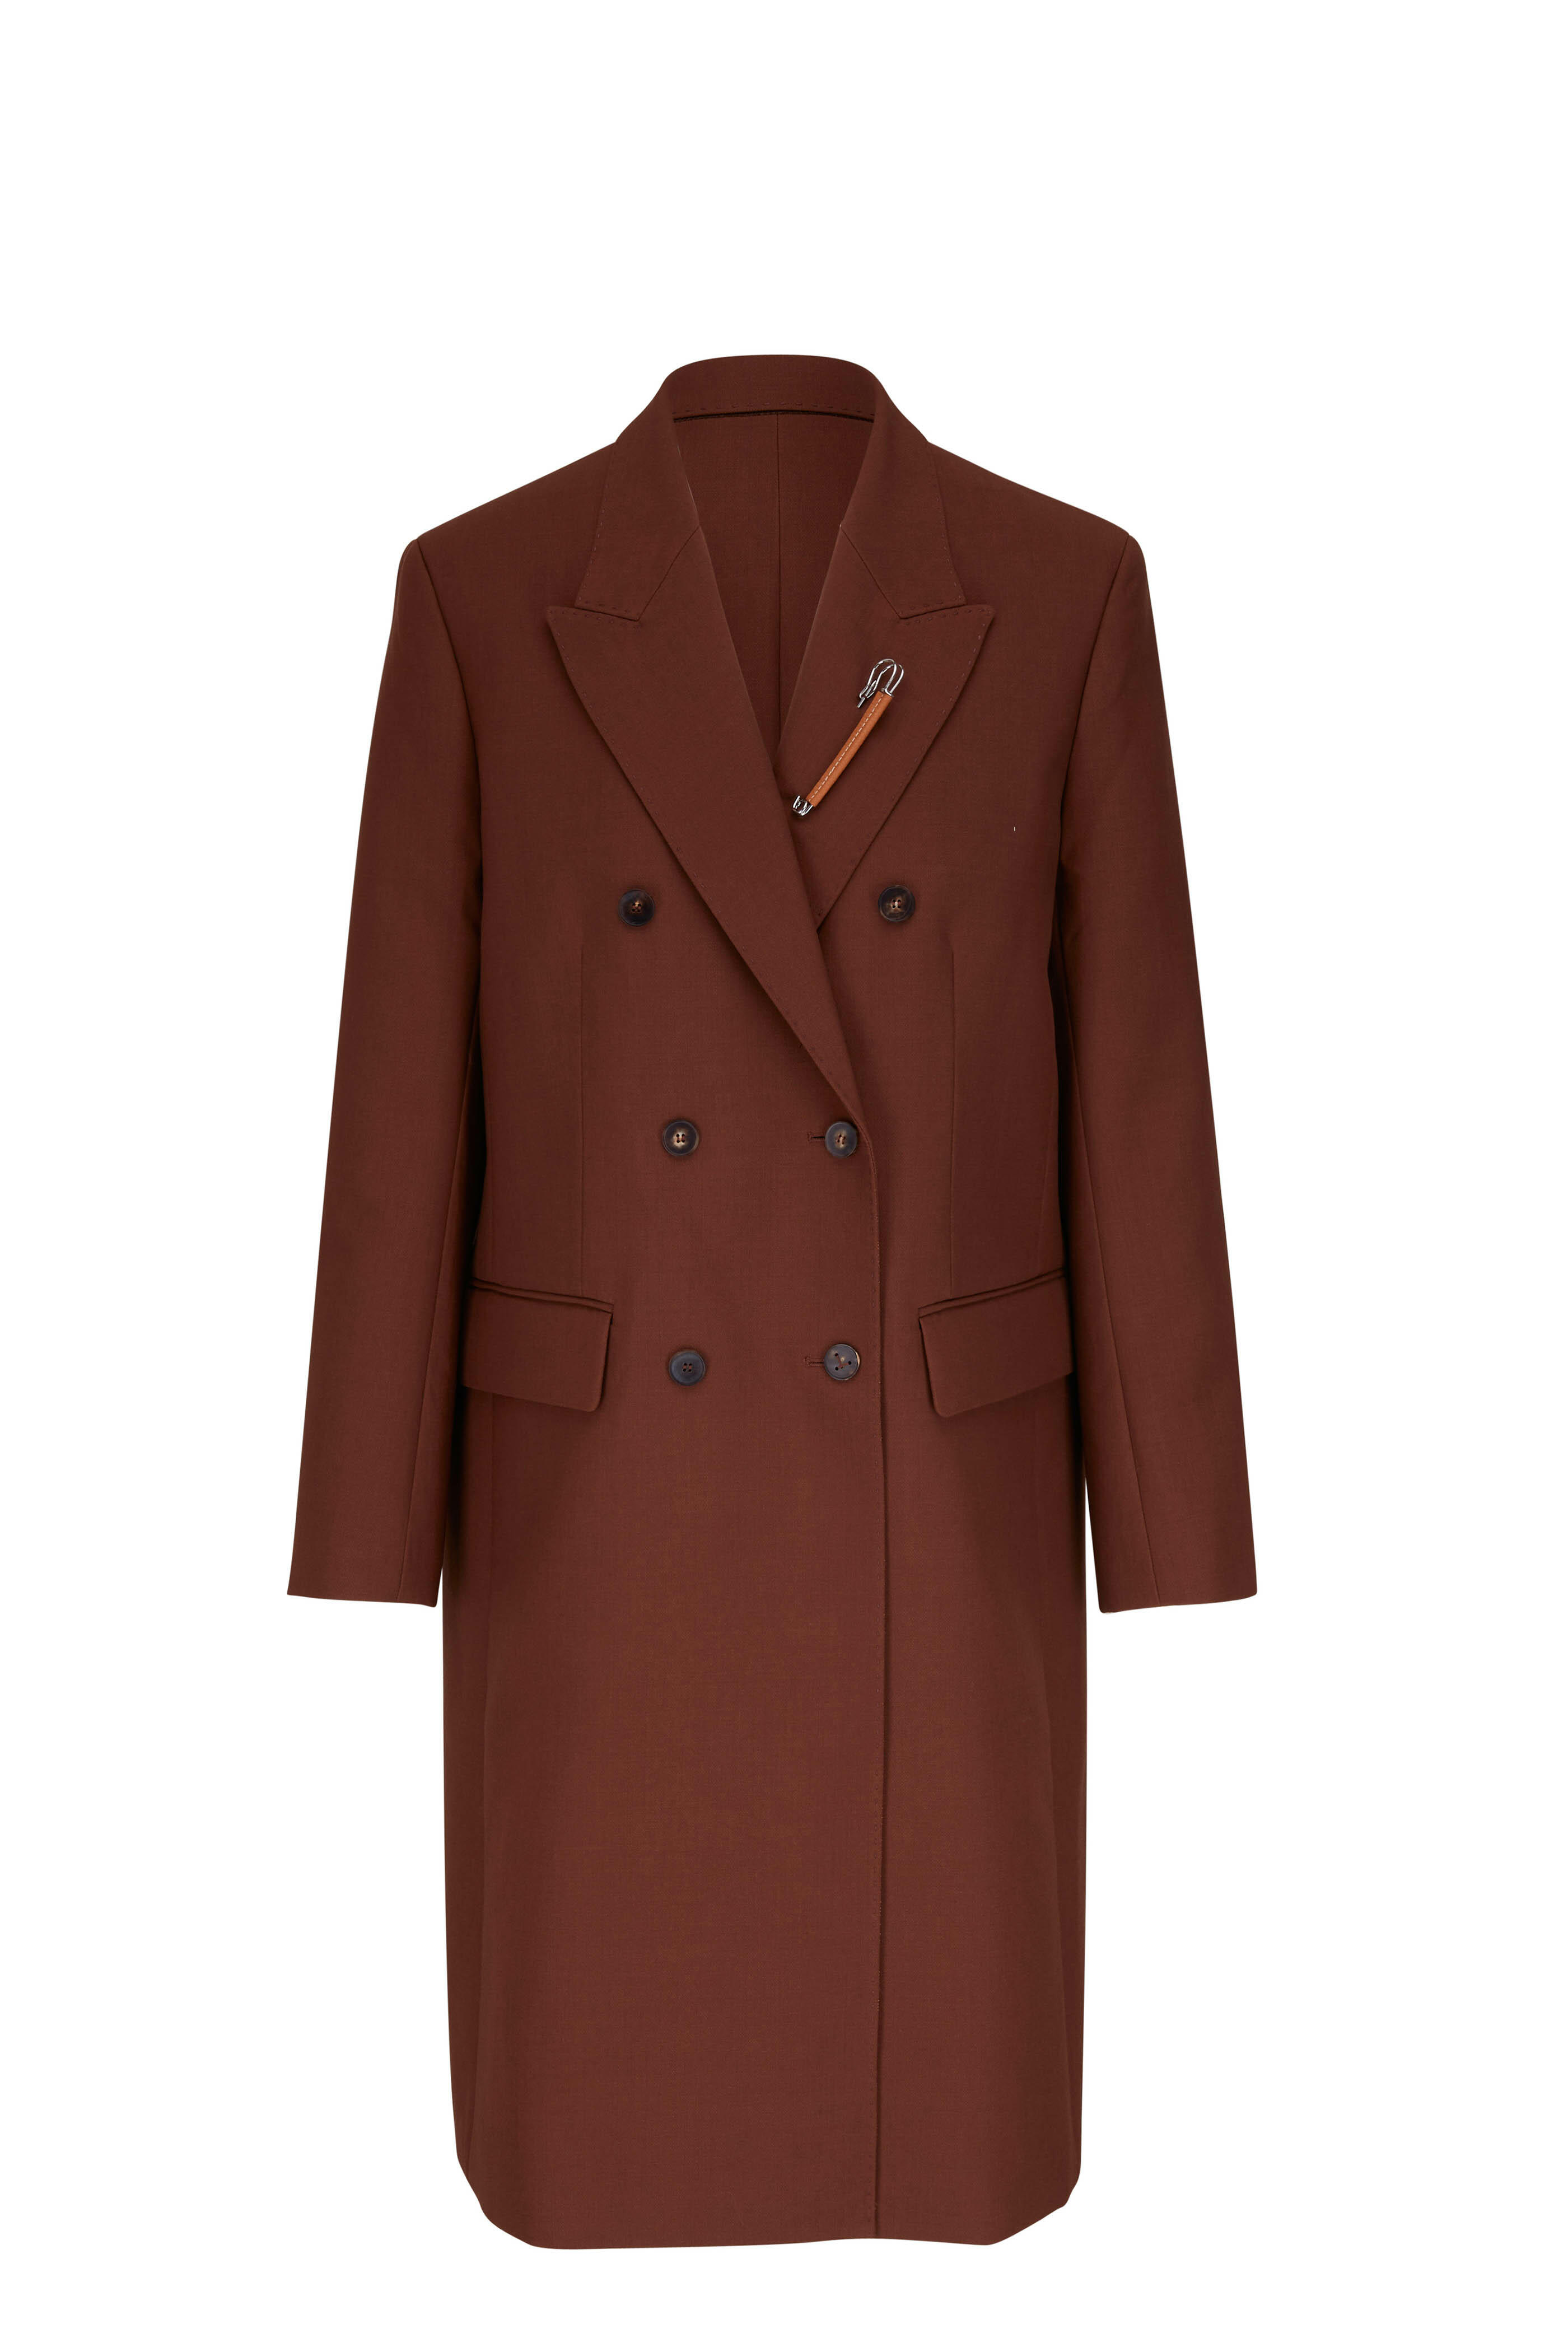 Lafayette 148 New York - Chesterfield Copper Dust Double Breasted Coat